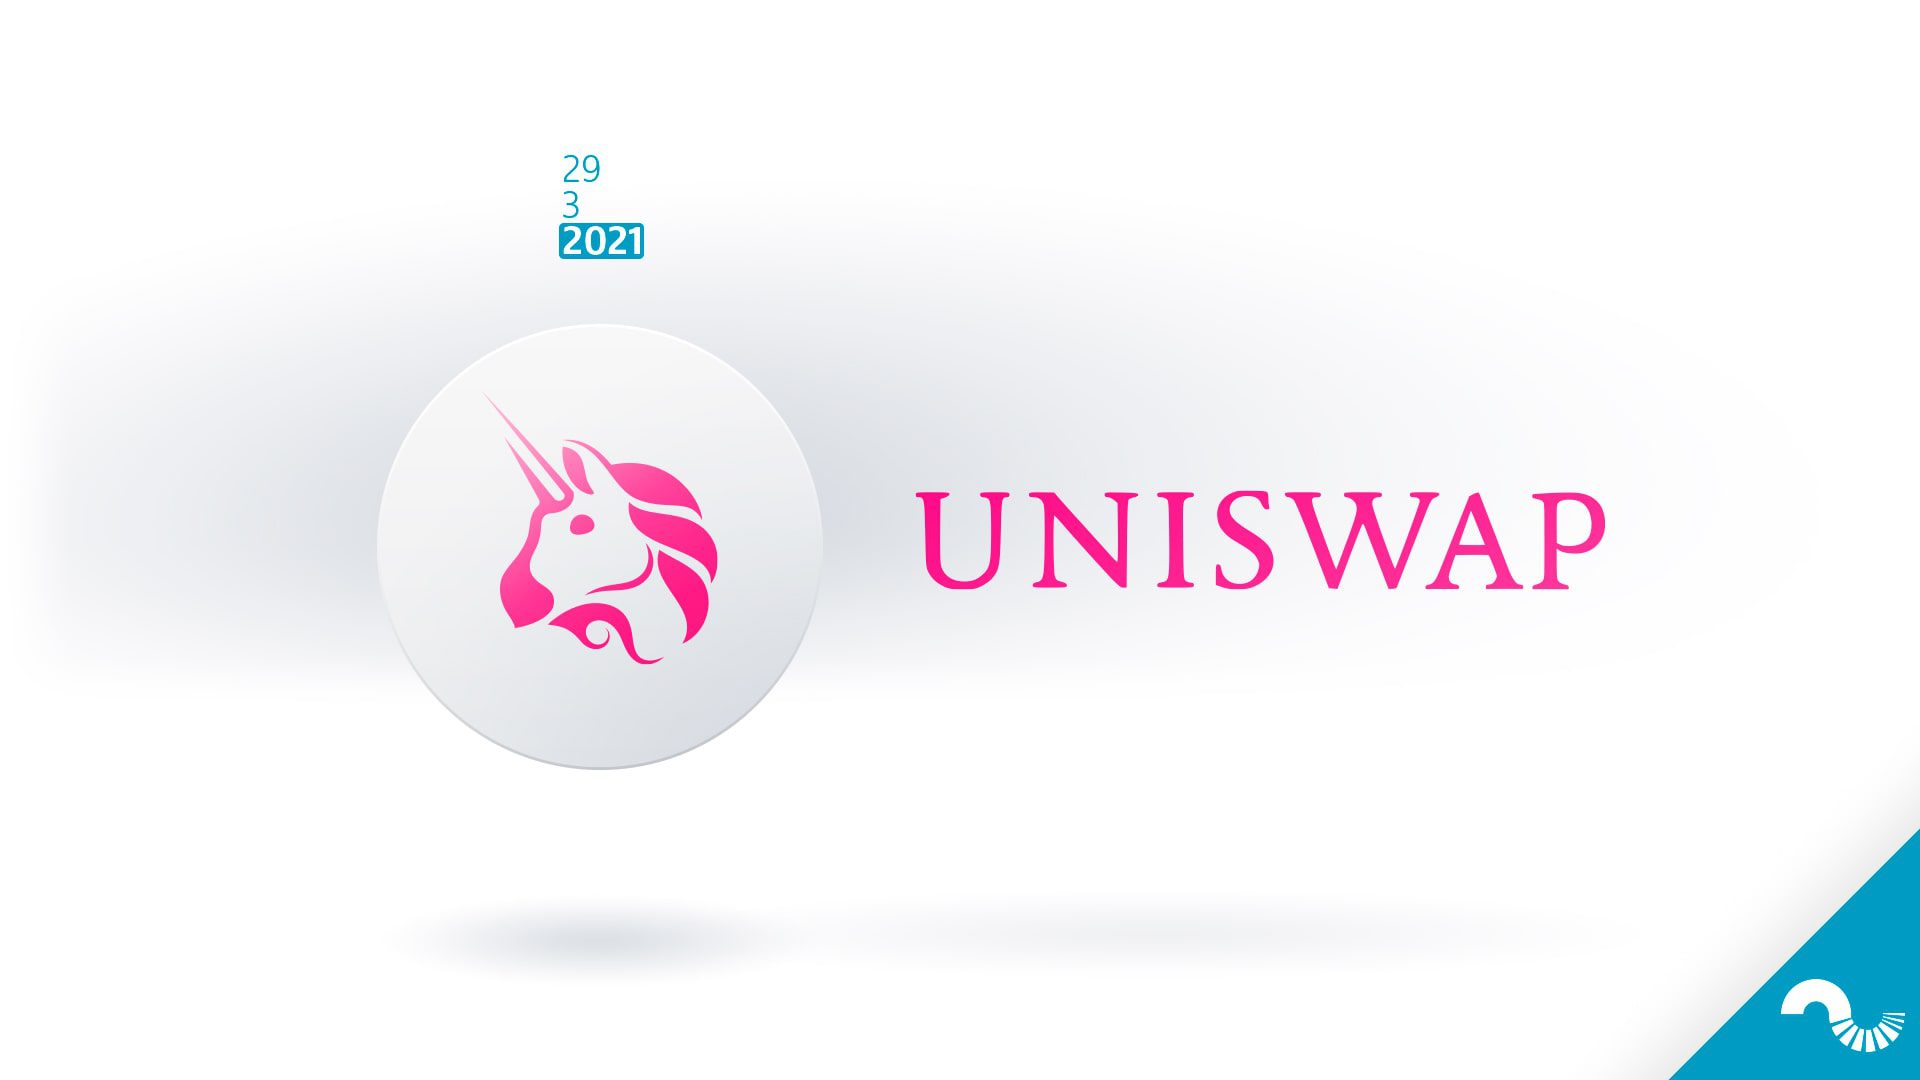 Uniswap is preparing for the NFT and Web3 markets